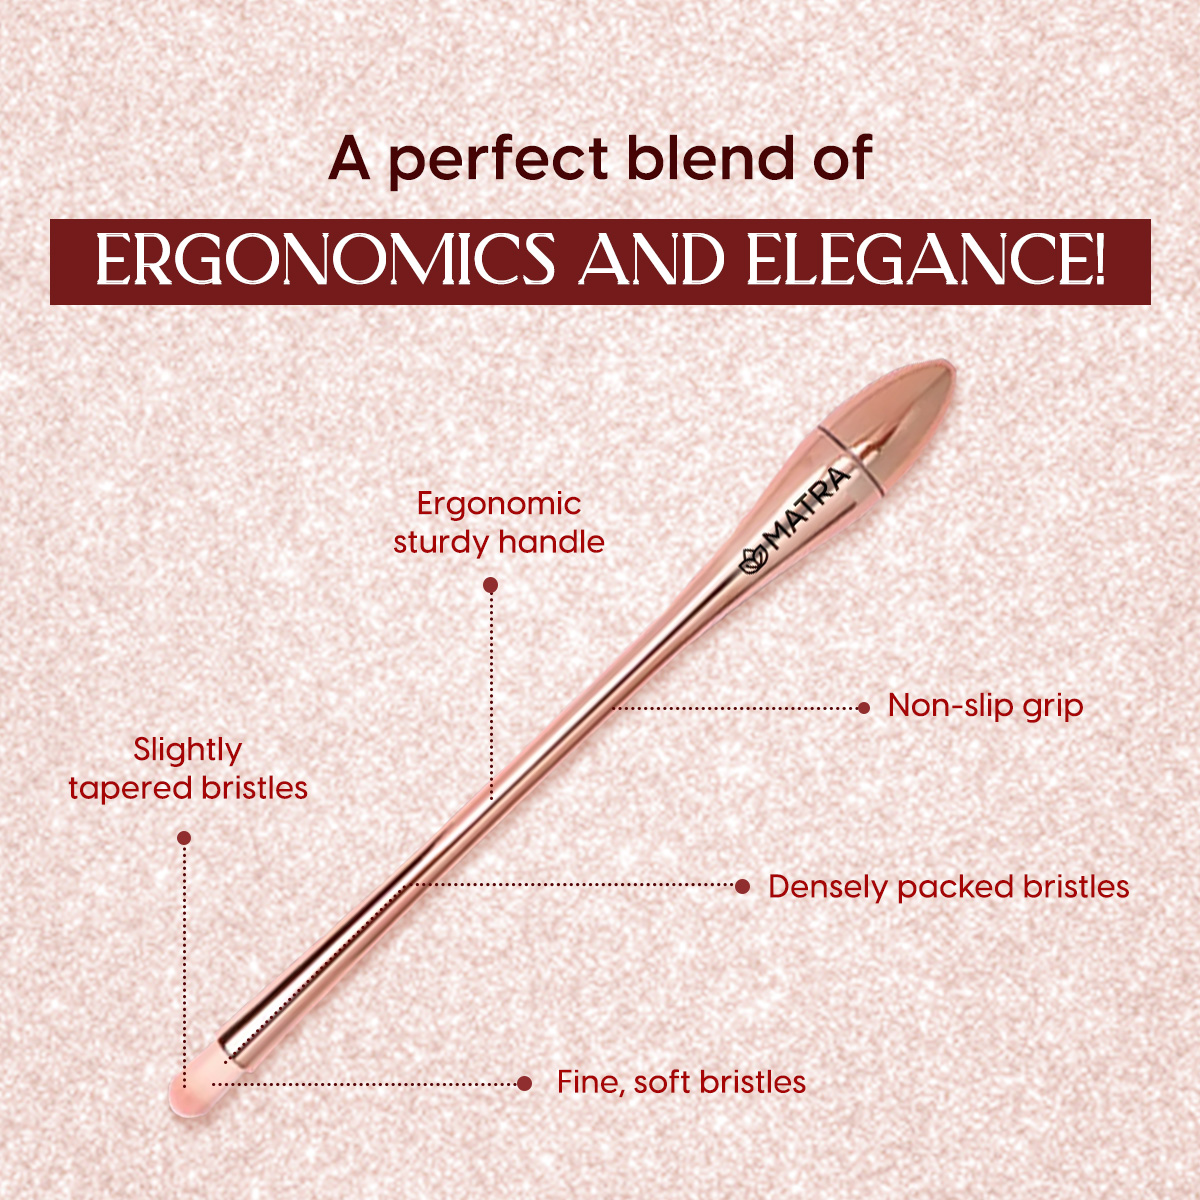 VINAURA Professional Face and Nose Contour Brush, Angular shape, for Liquid  and Cream products. Pack of 2 Brushes Face Makeup Eye Makeup Makeup Artist  Brushes - Price in India, Buy VINAURA Professional